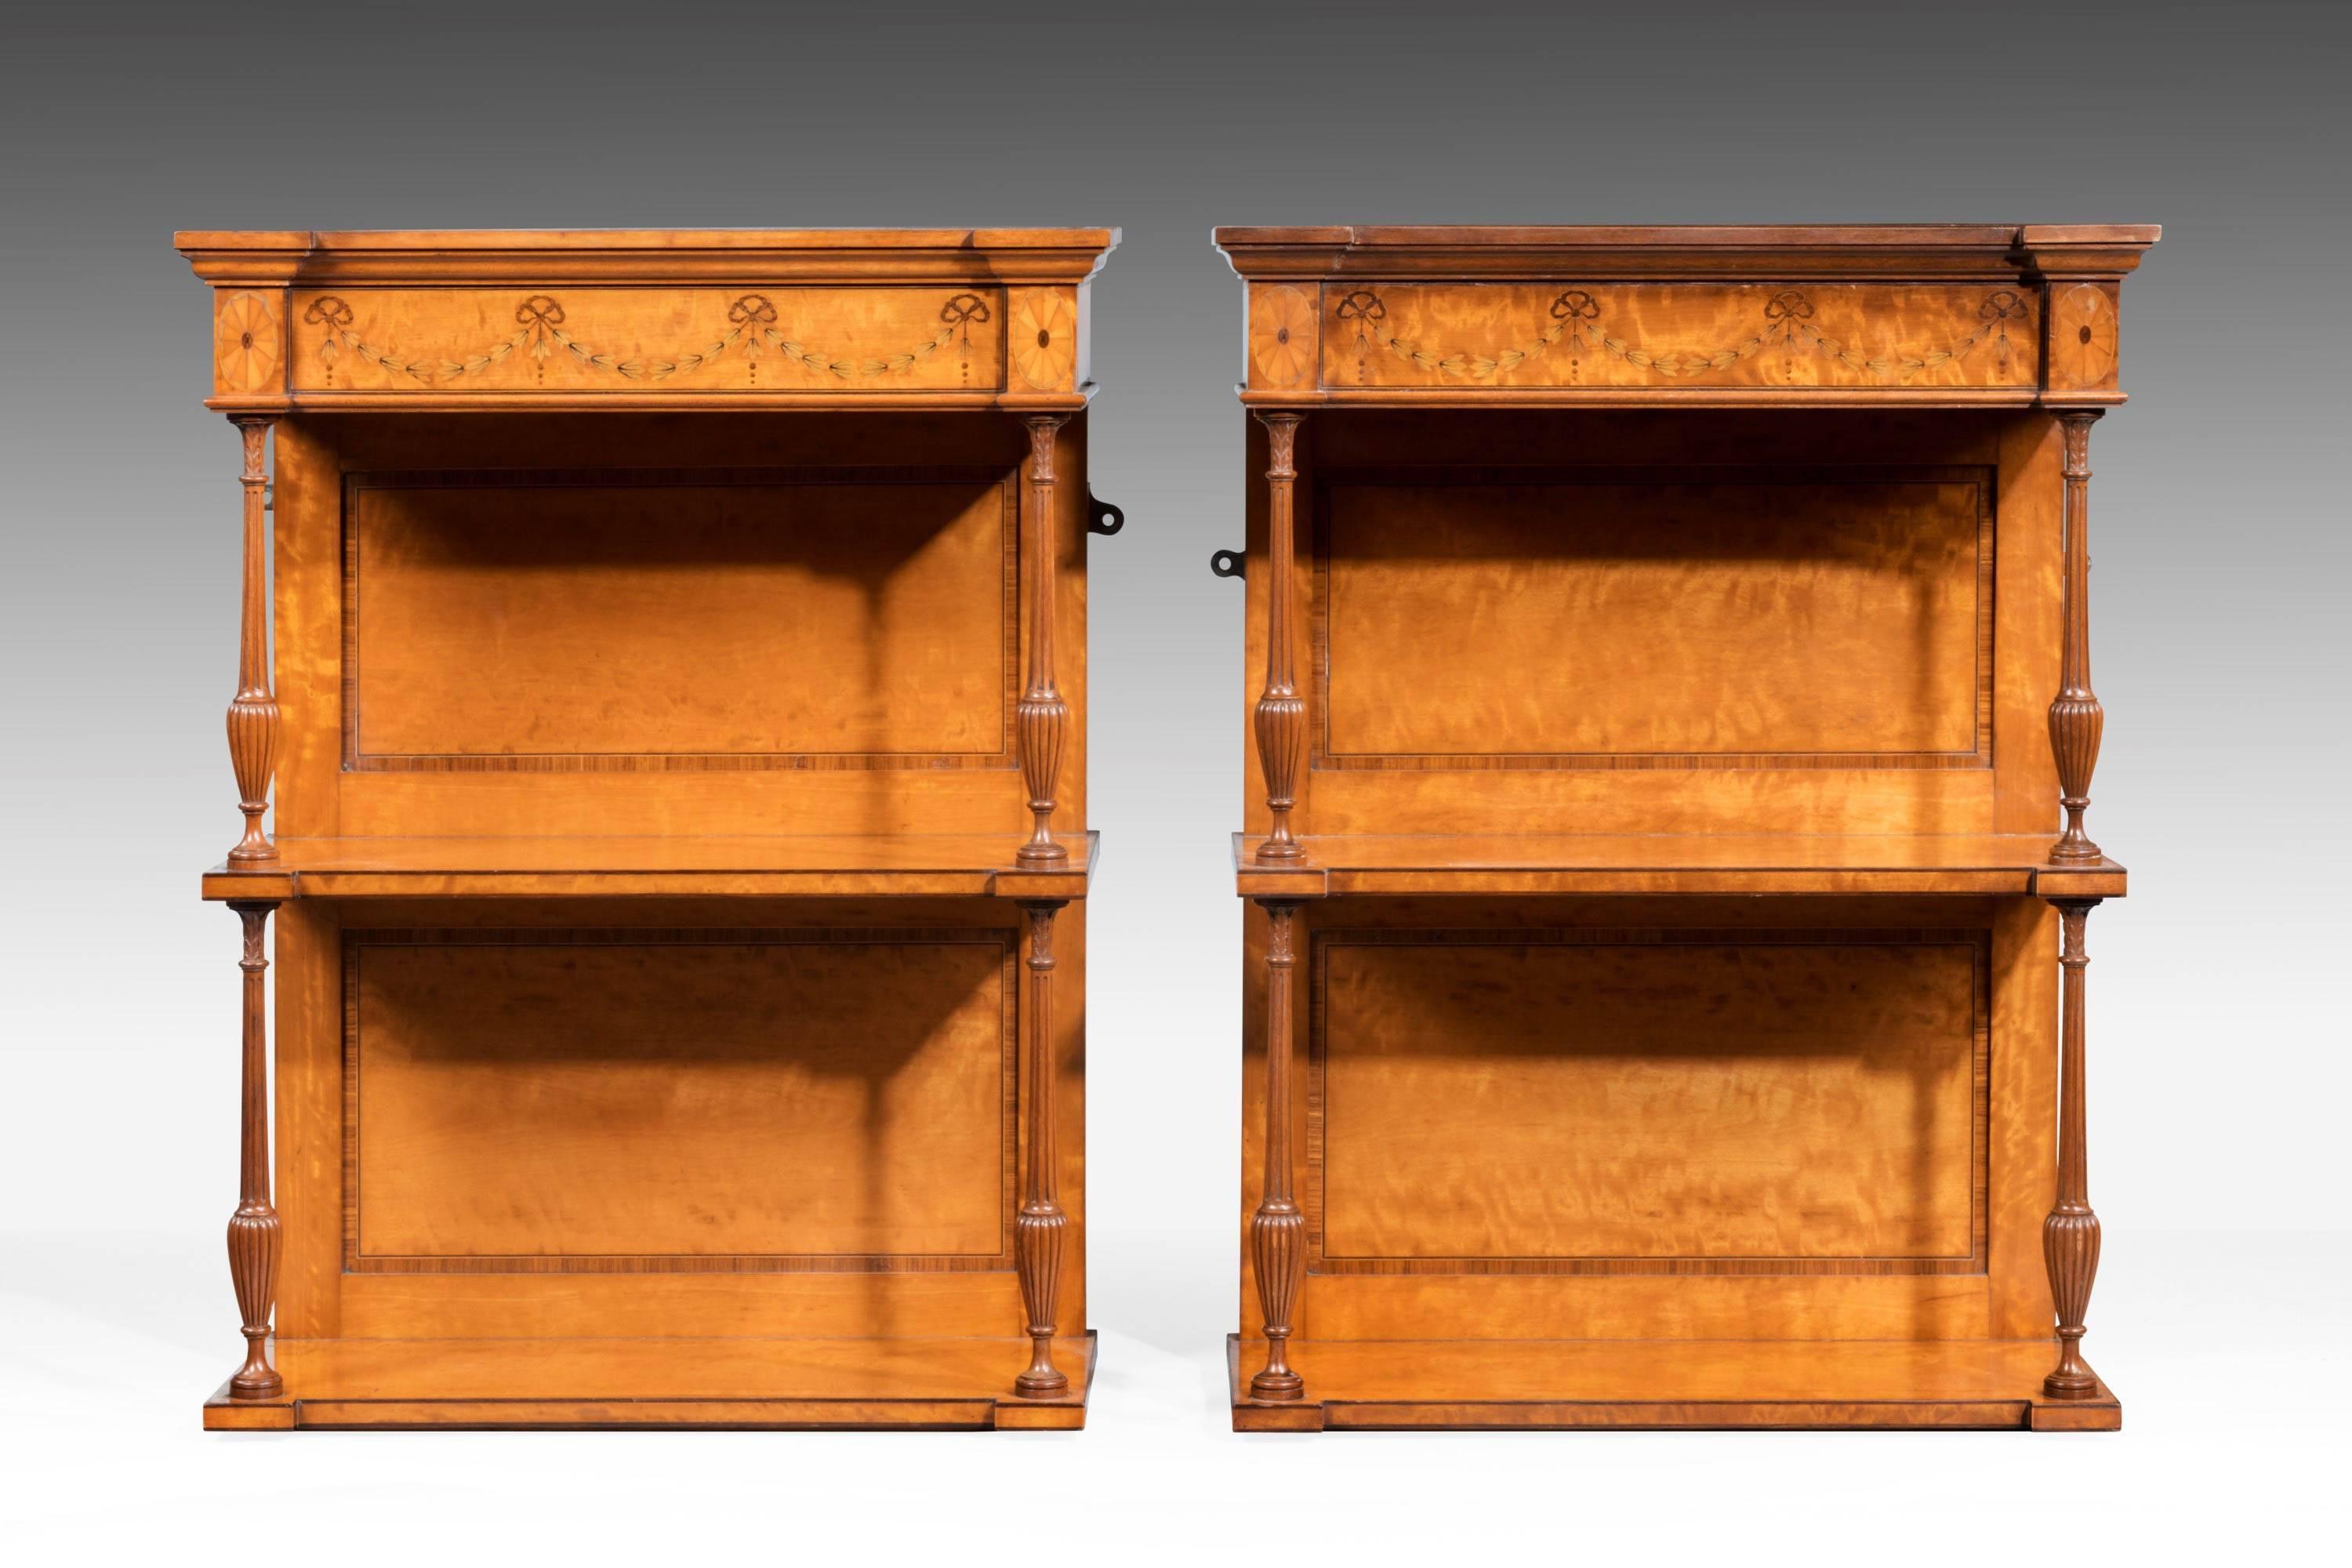 A rare pair of beautifully figured satinwood and marquetry hanging shelves. Finely crossbanded detail and marquetry inlay to the top section. Finely turned pear shaped supports to the reeded decoration.